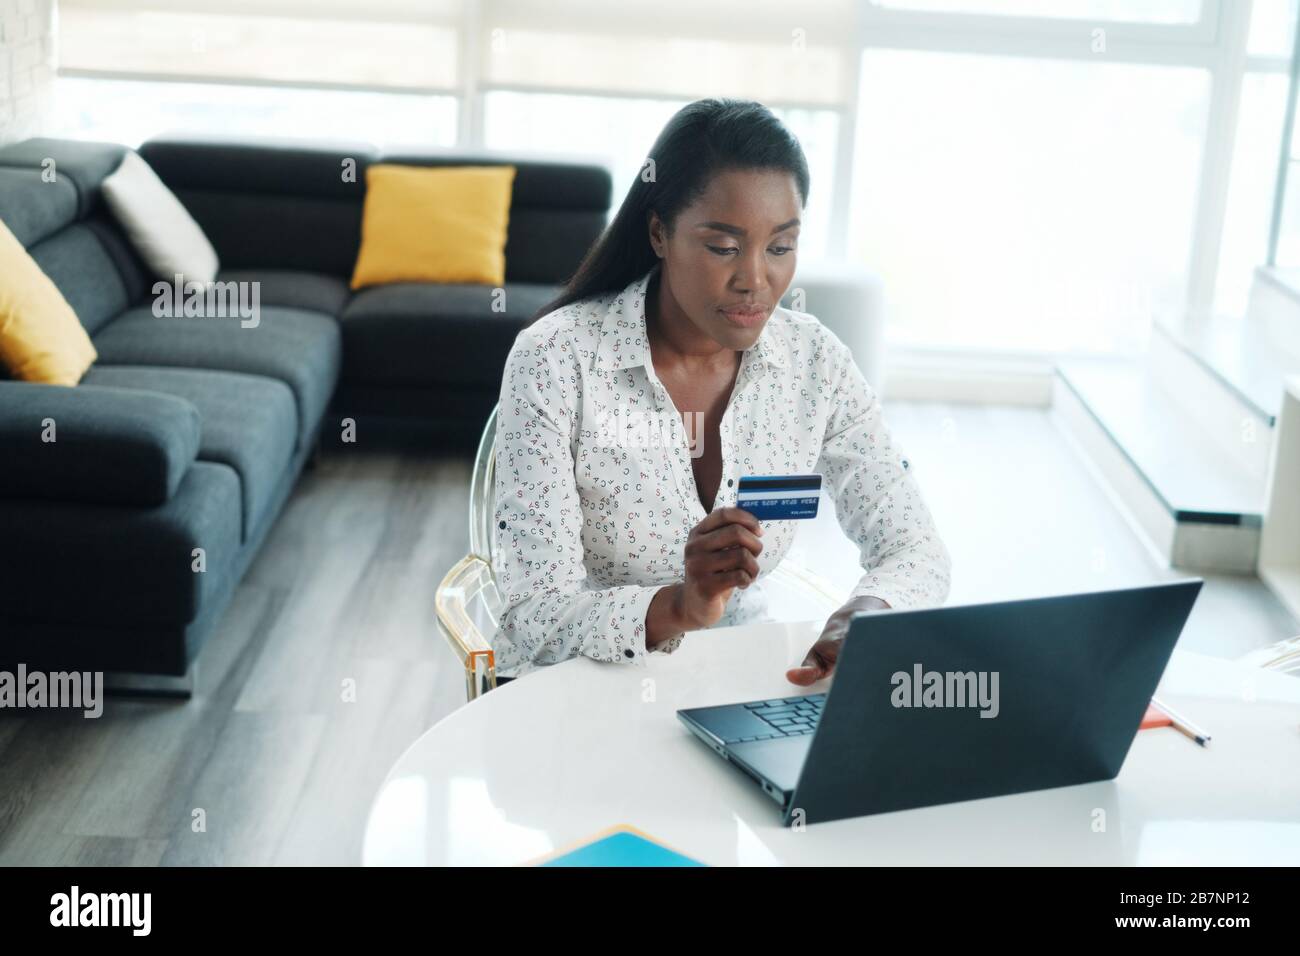 Black Woman Paying Online Purchase With Credit Card Stock Photo